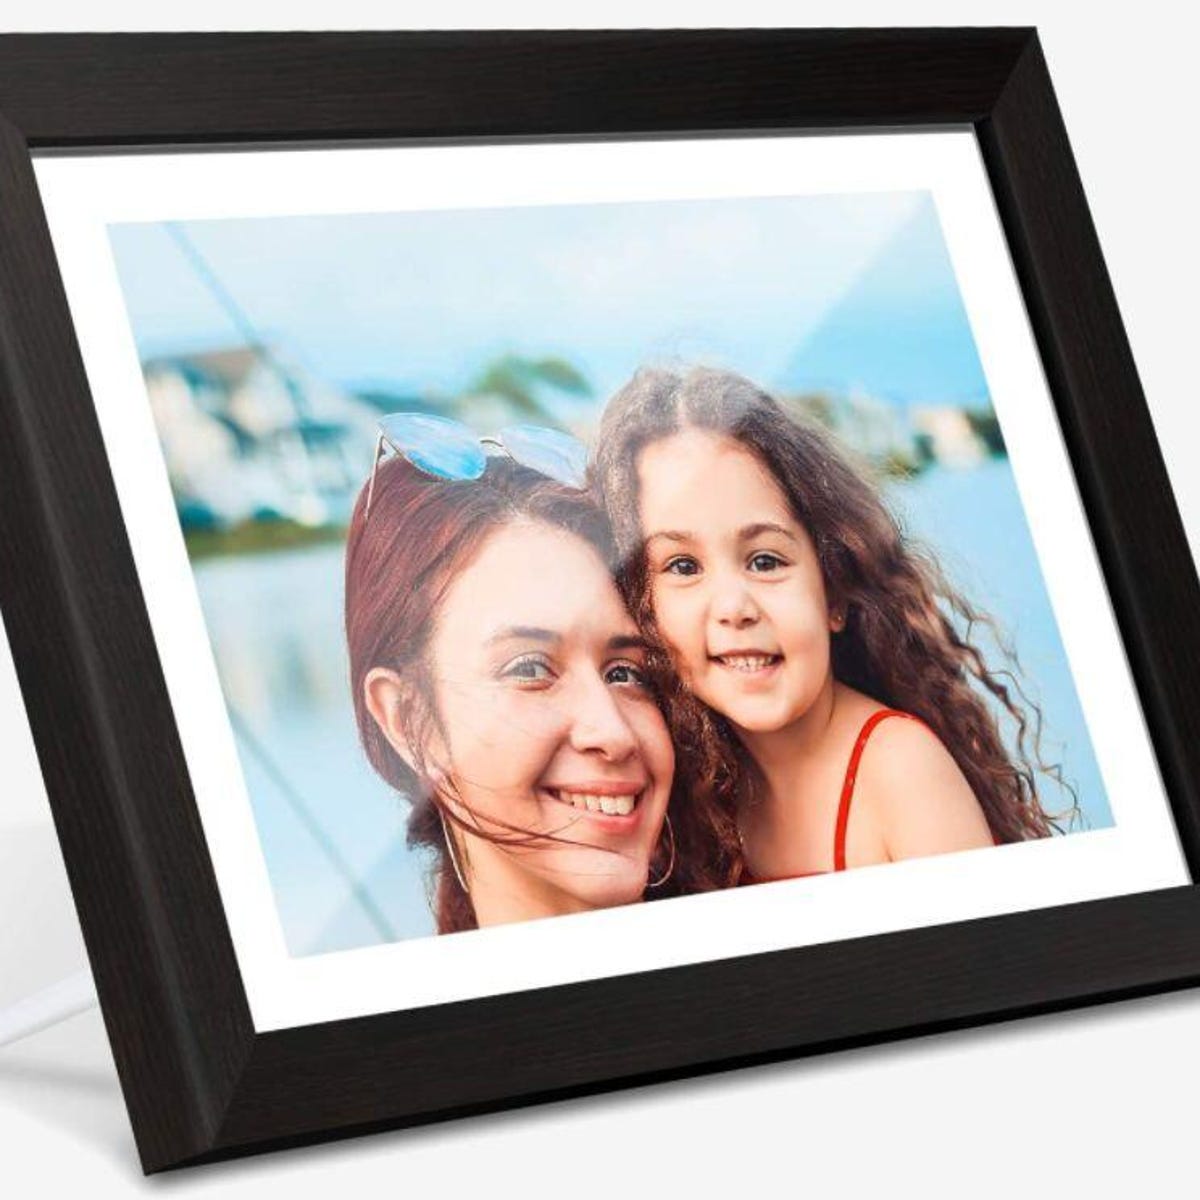 Enjoy beloved photos with this 10.1-inch digital photo frame for $68 (Update: - CNET